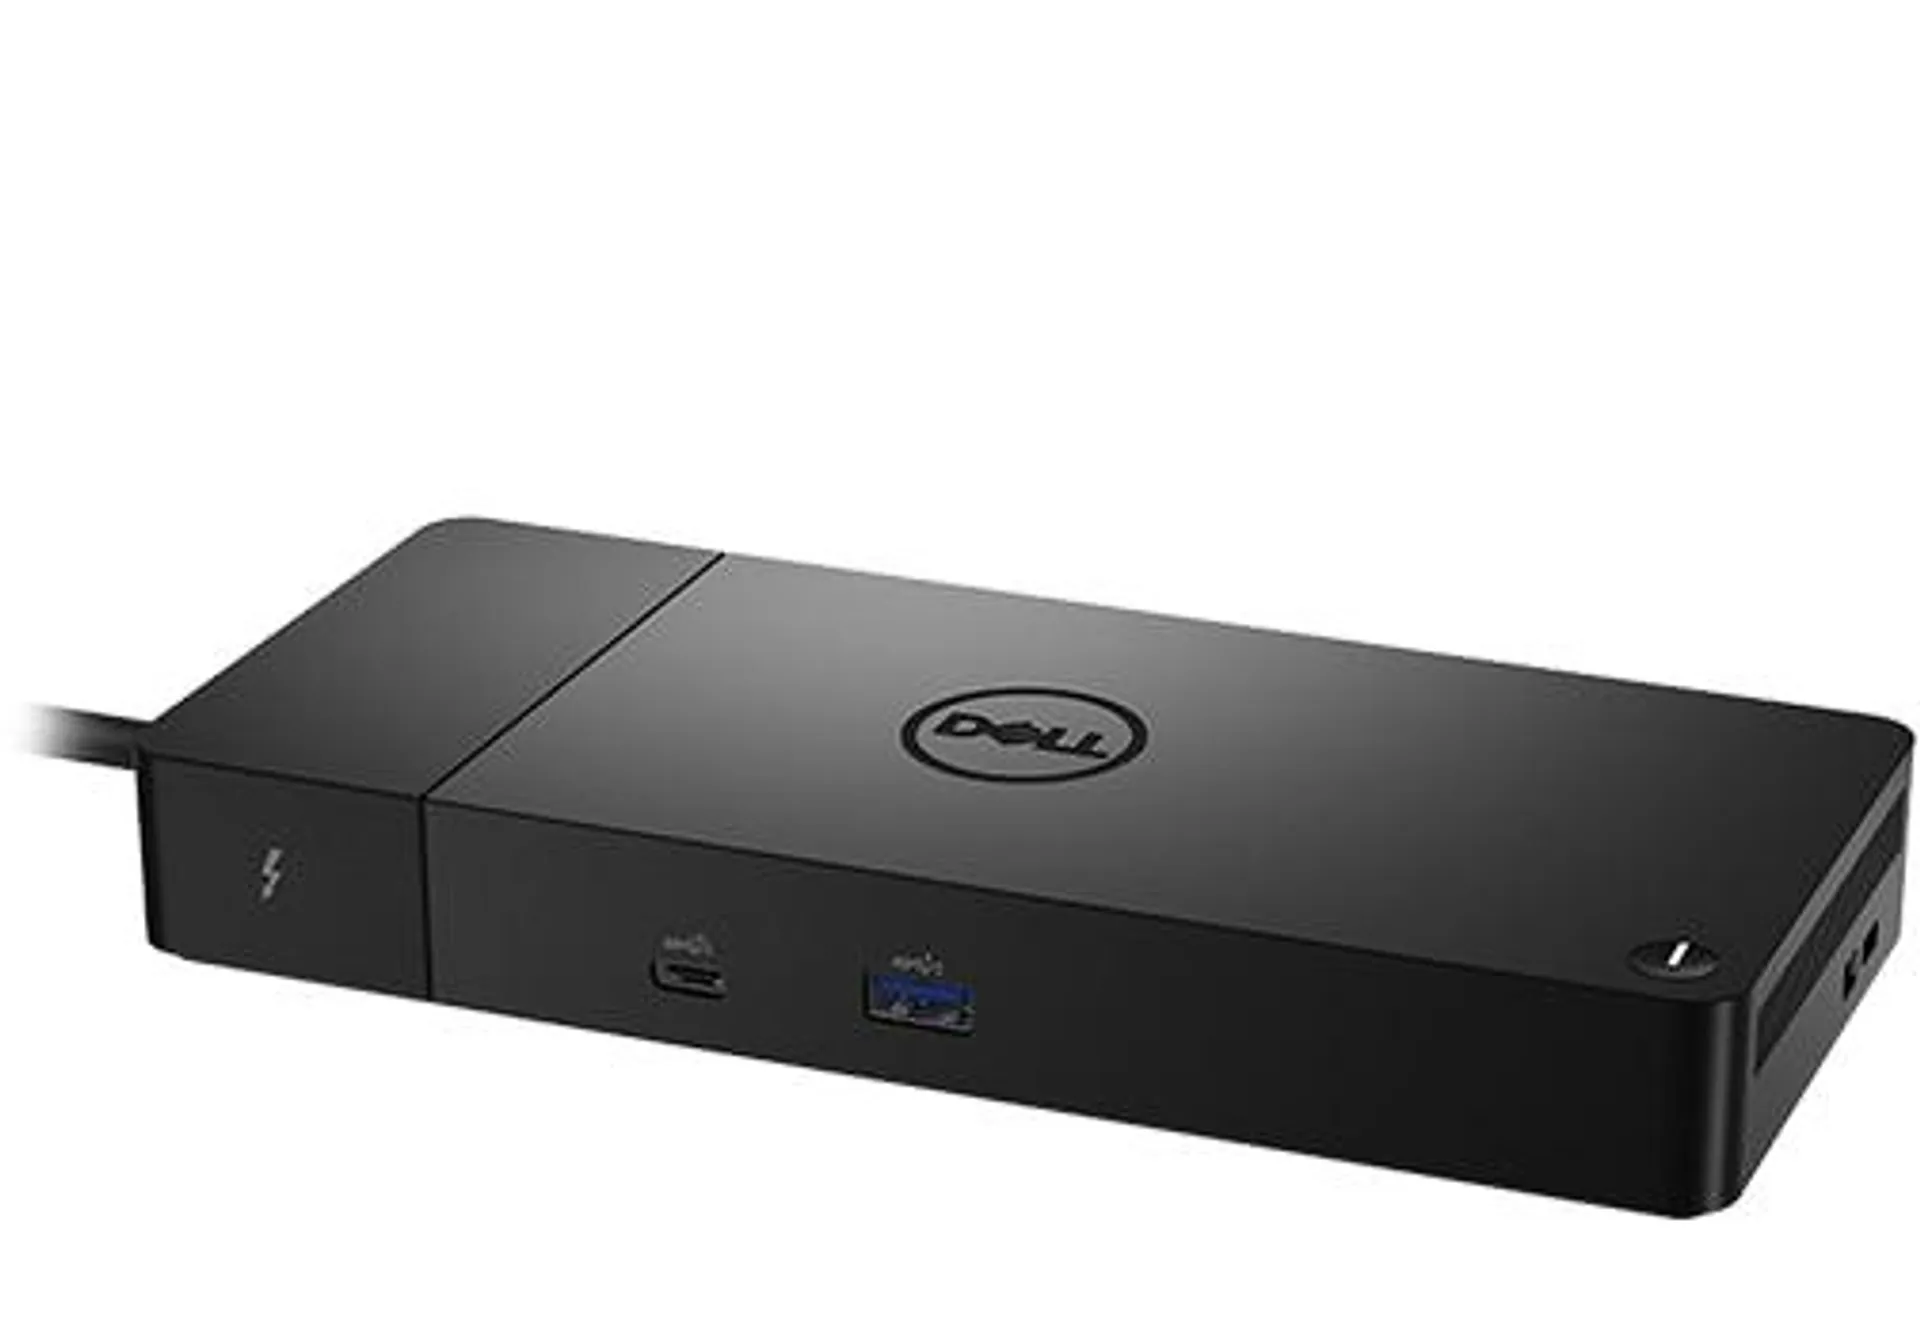 WD22TB4 - Dell Thunderbolt™ Dock - 130w Power Delivery, Up to 4 x 4K Displays, 7 USB Ports